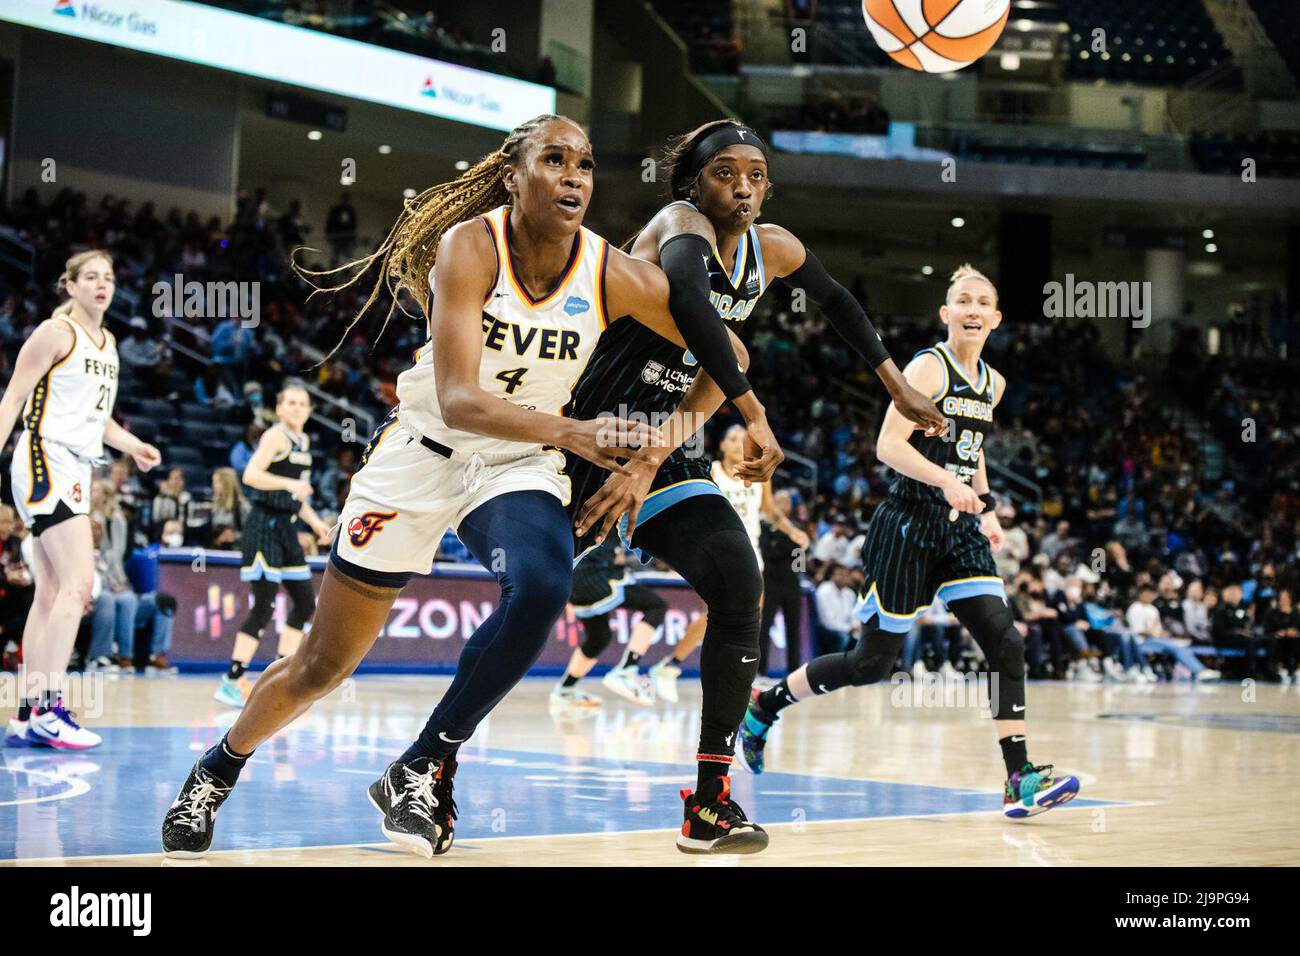 Chicago, United States. 24th May, 2022. Kahleah Copper (2 Chicago Sky) and Queen Egbo (4 Indiana Fever) chase the ball during the game between the Chicago Sky and Indiana Fever on Tuesday May 24, 2022 at Wintrust Arena, Chicago, USA. (NO COMMERCIAL USAGE) Shaina Benhiyoun/SPP Credit: SPP Sport Press Photo. /Alamy Live News Stock Photo